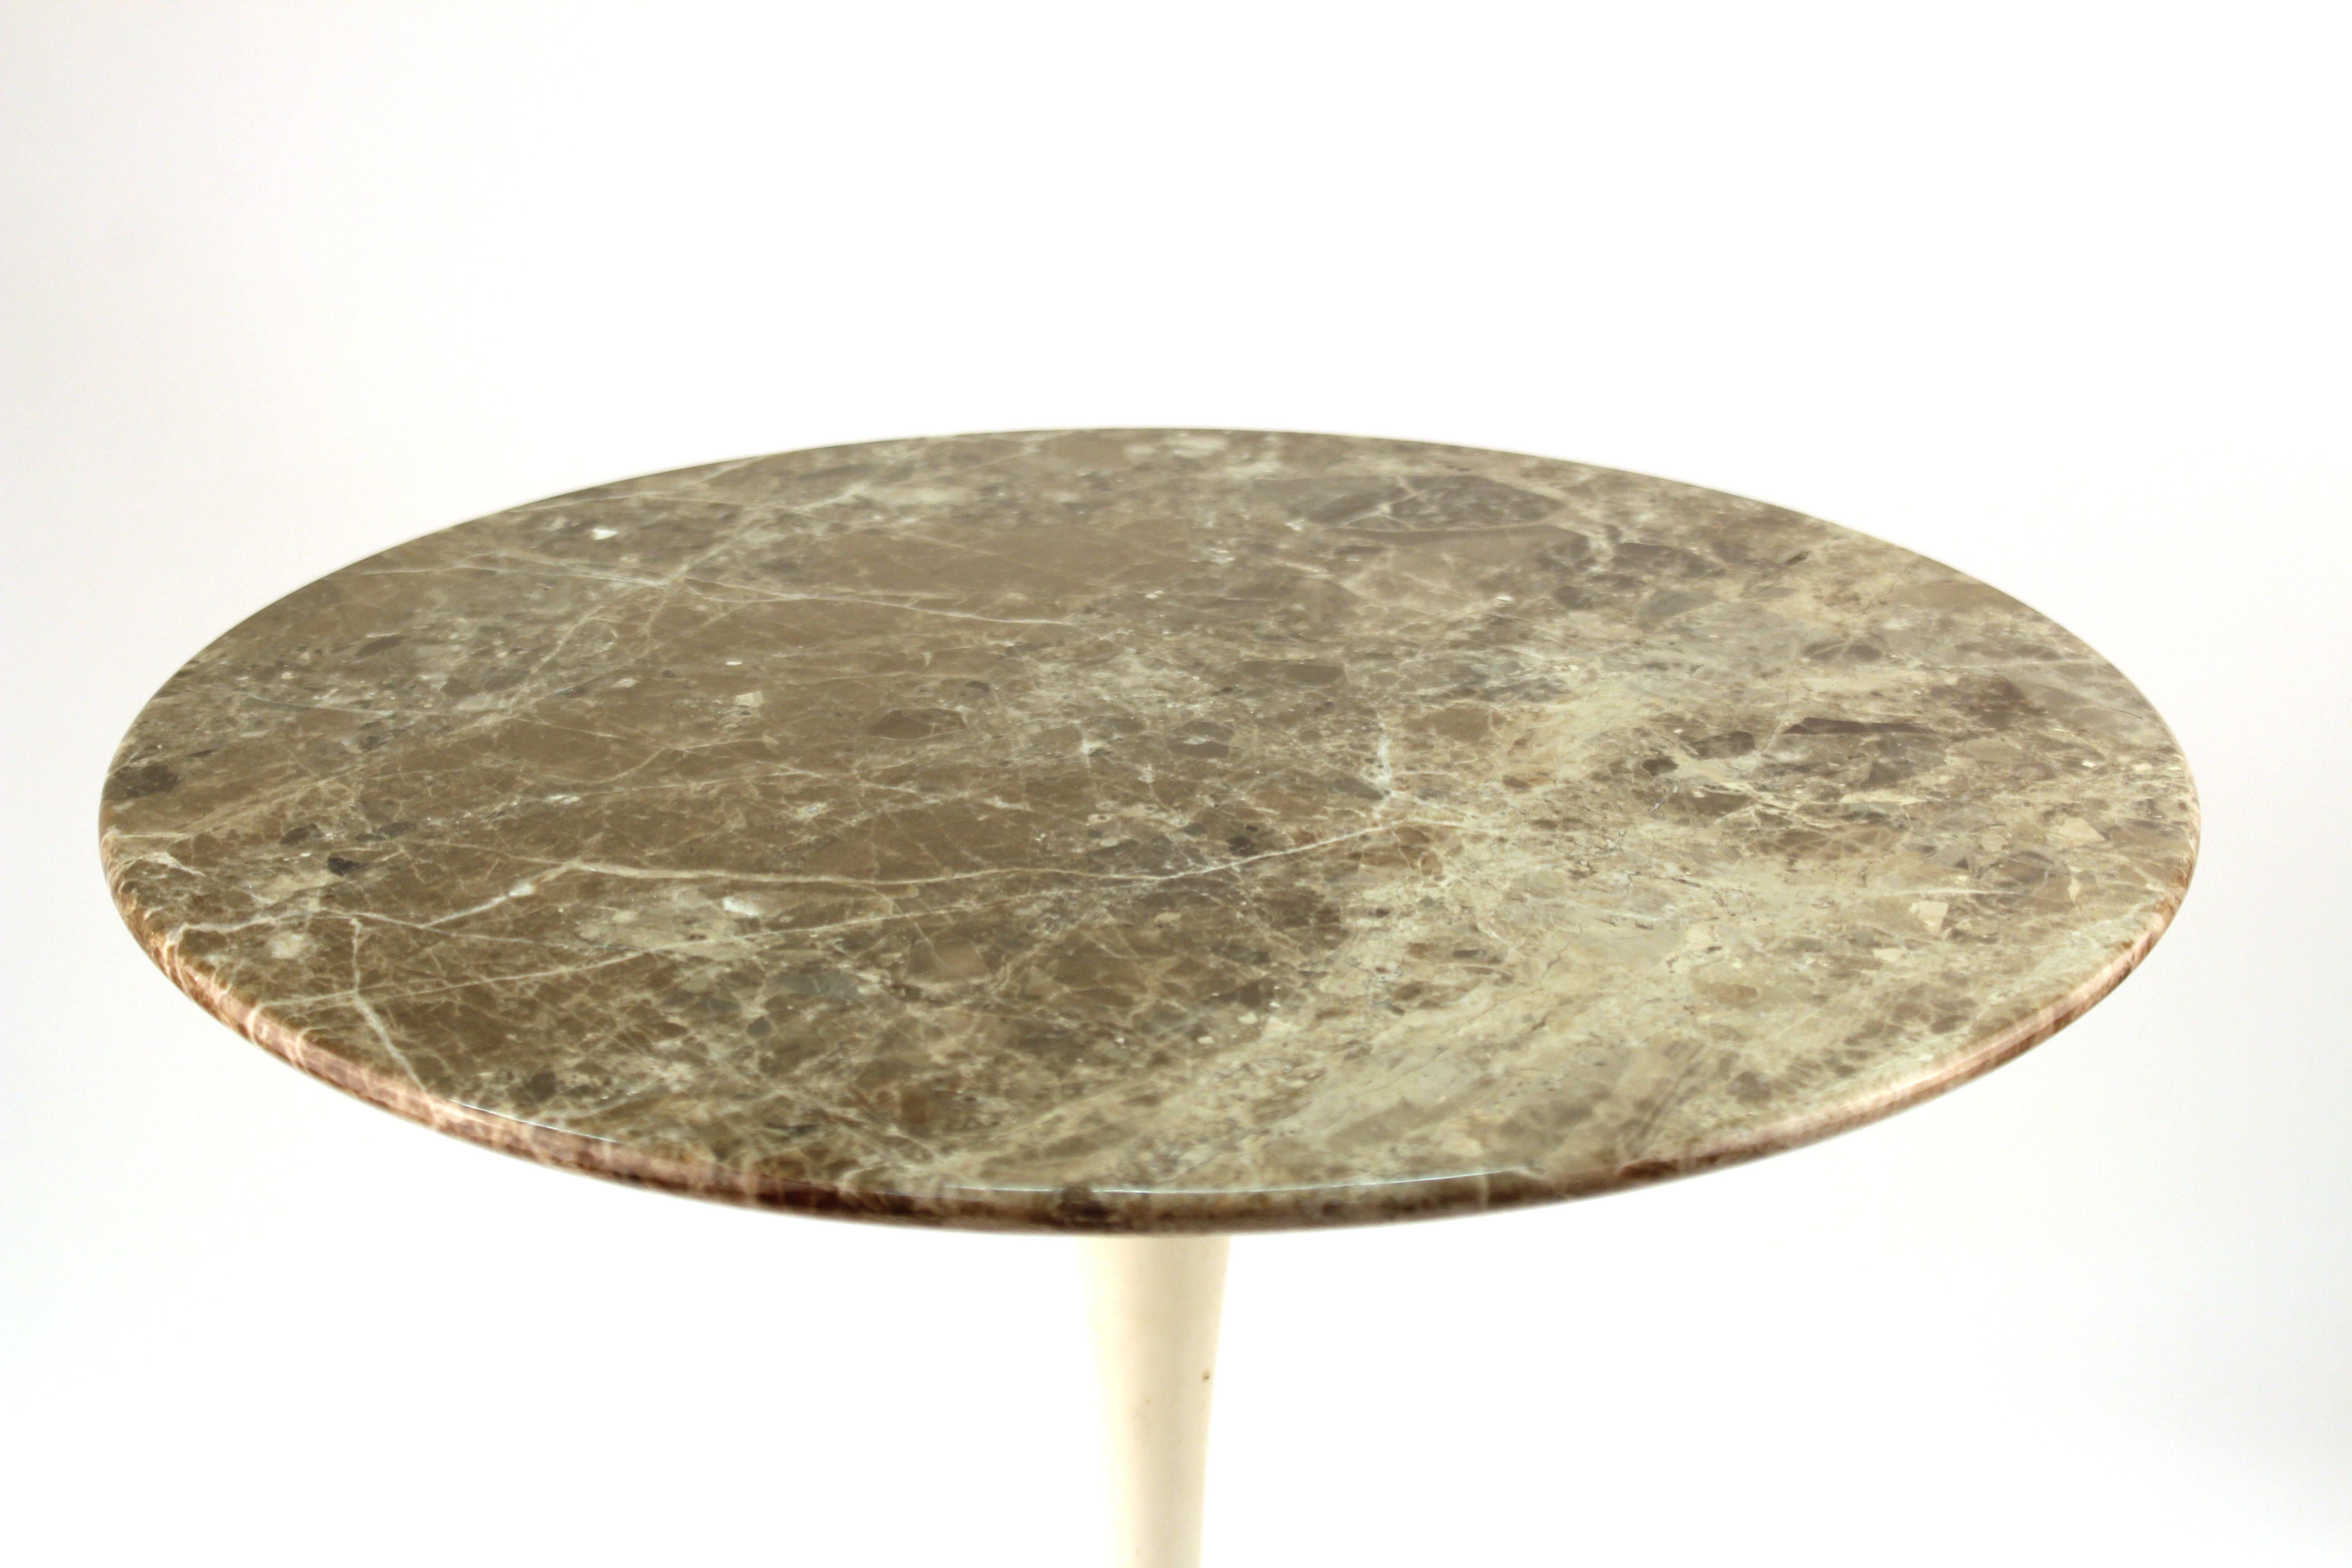 American Mid-Century Modern Tulip side table designed by Eero Saarinen for Knoll International in the mid-20th century. From the estate of the late Peter Knoll in New York City. The piece has a natural marble top and cast iron base. In good vintage